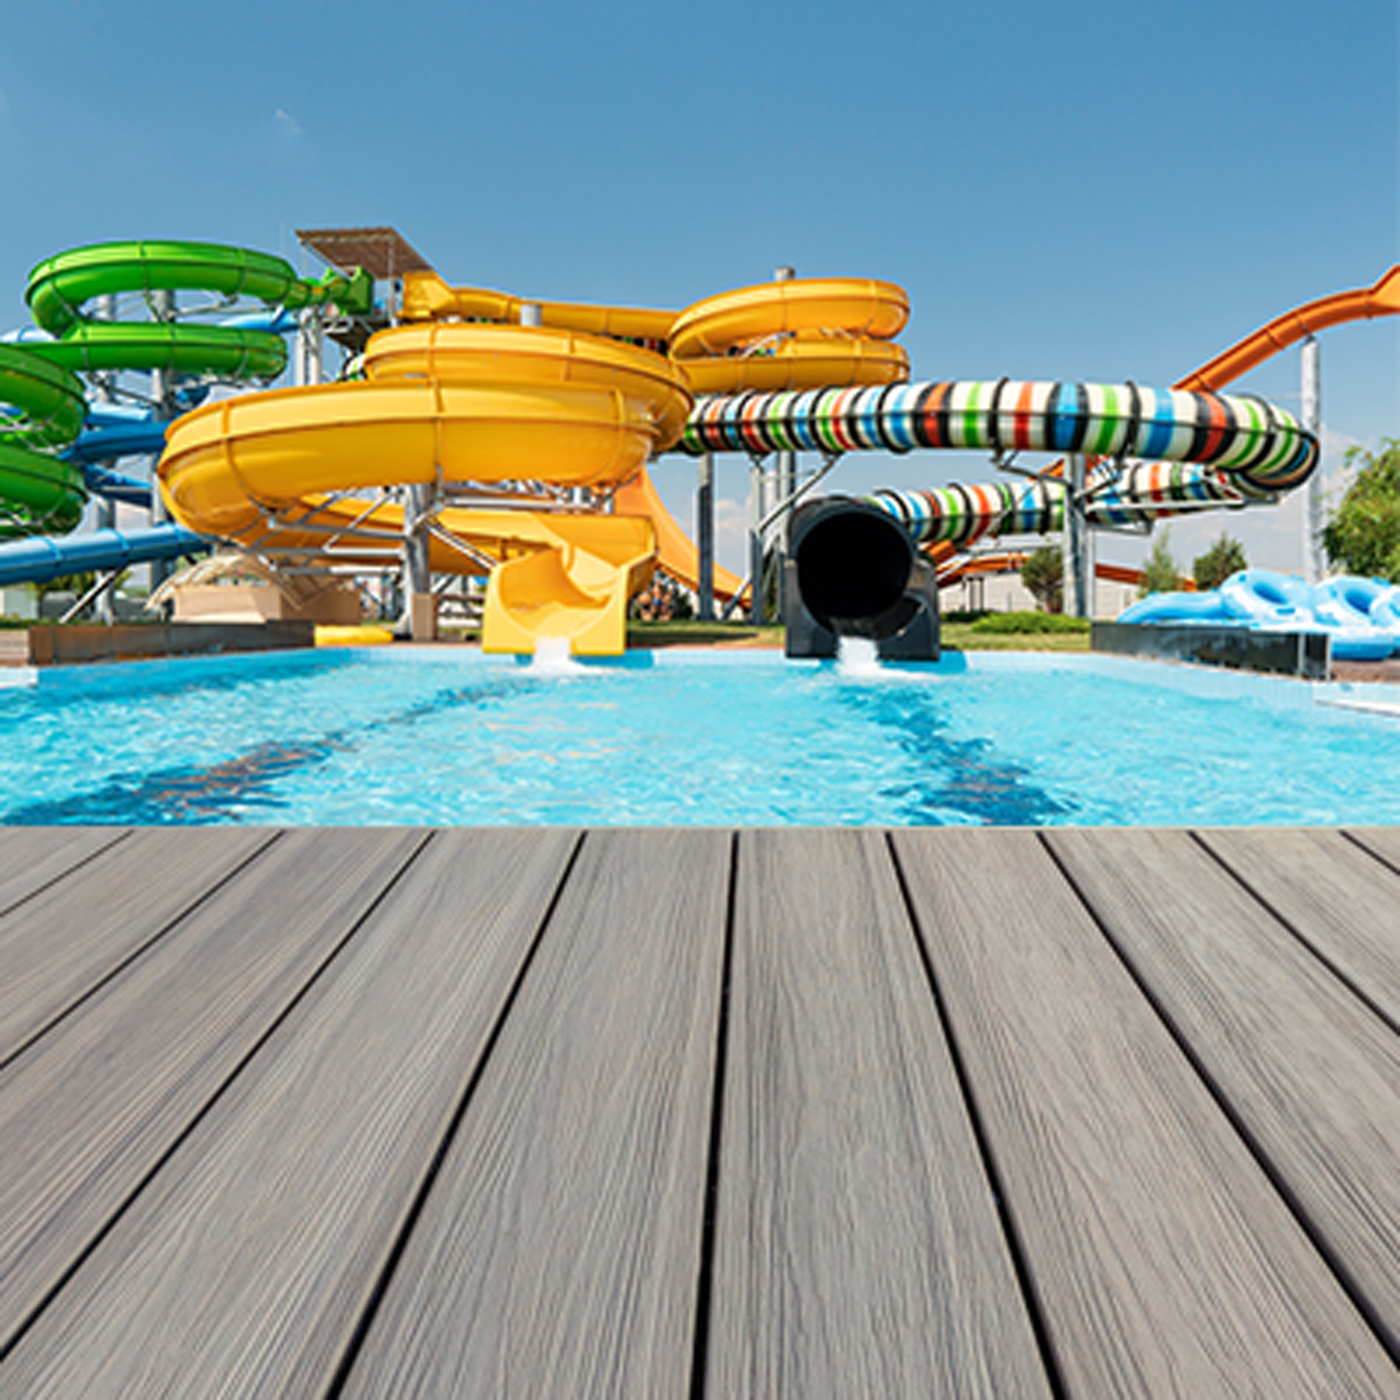 Composite deck boards shown at the bottom of water slides at a theme park. 